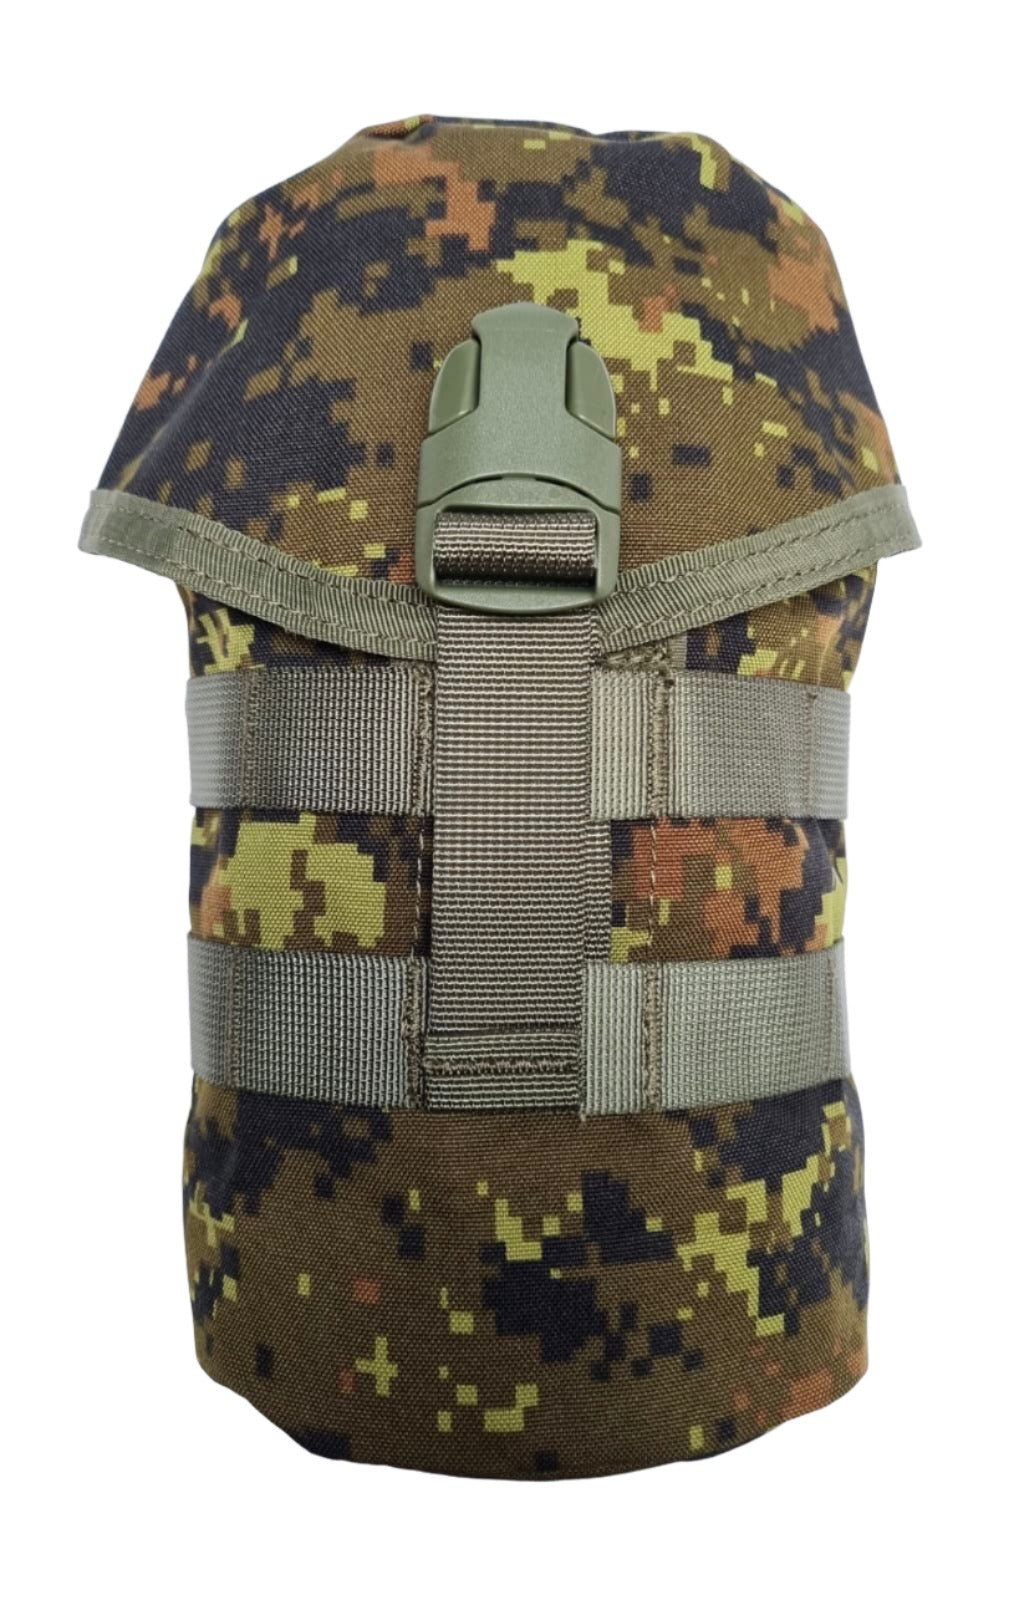 SHE-954 Camouflage  Canteen Pouch Colour Woodland digital / Estonian digital / Cadpat 